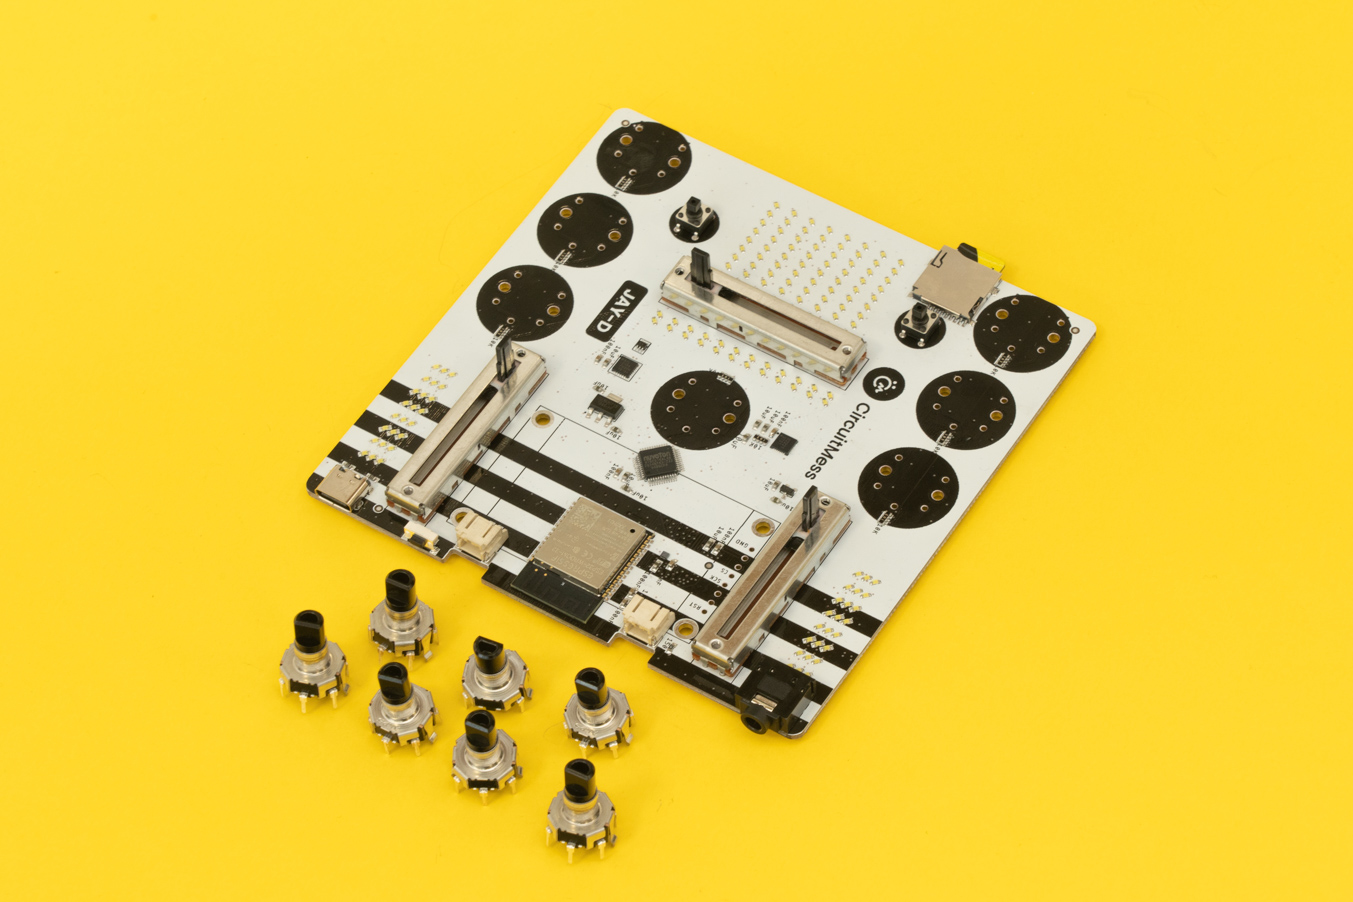 Components you need: 7 rotary encoders + board